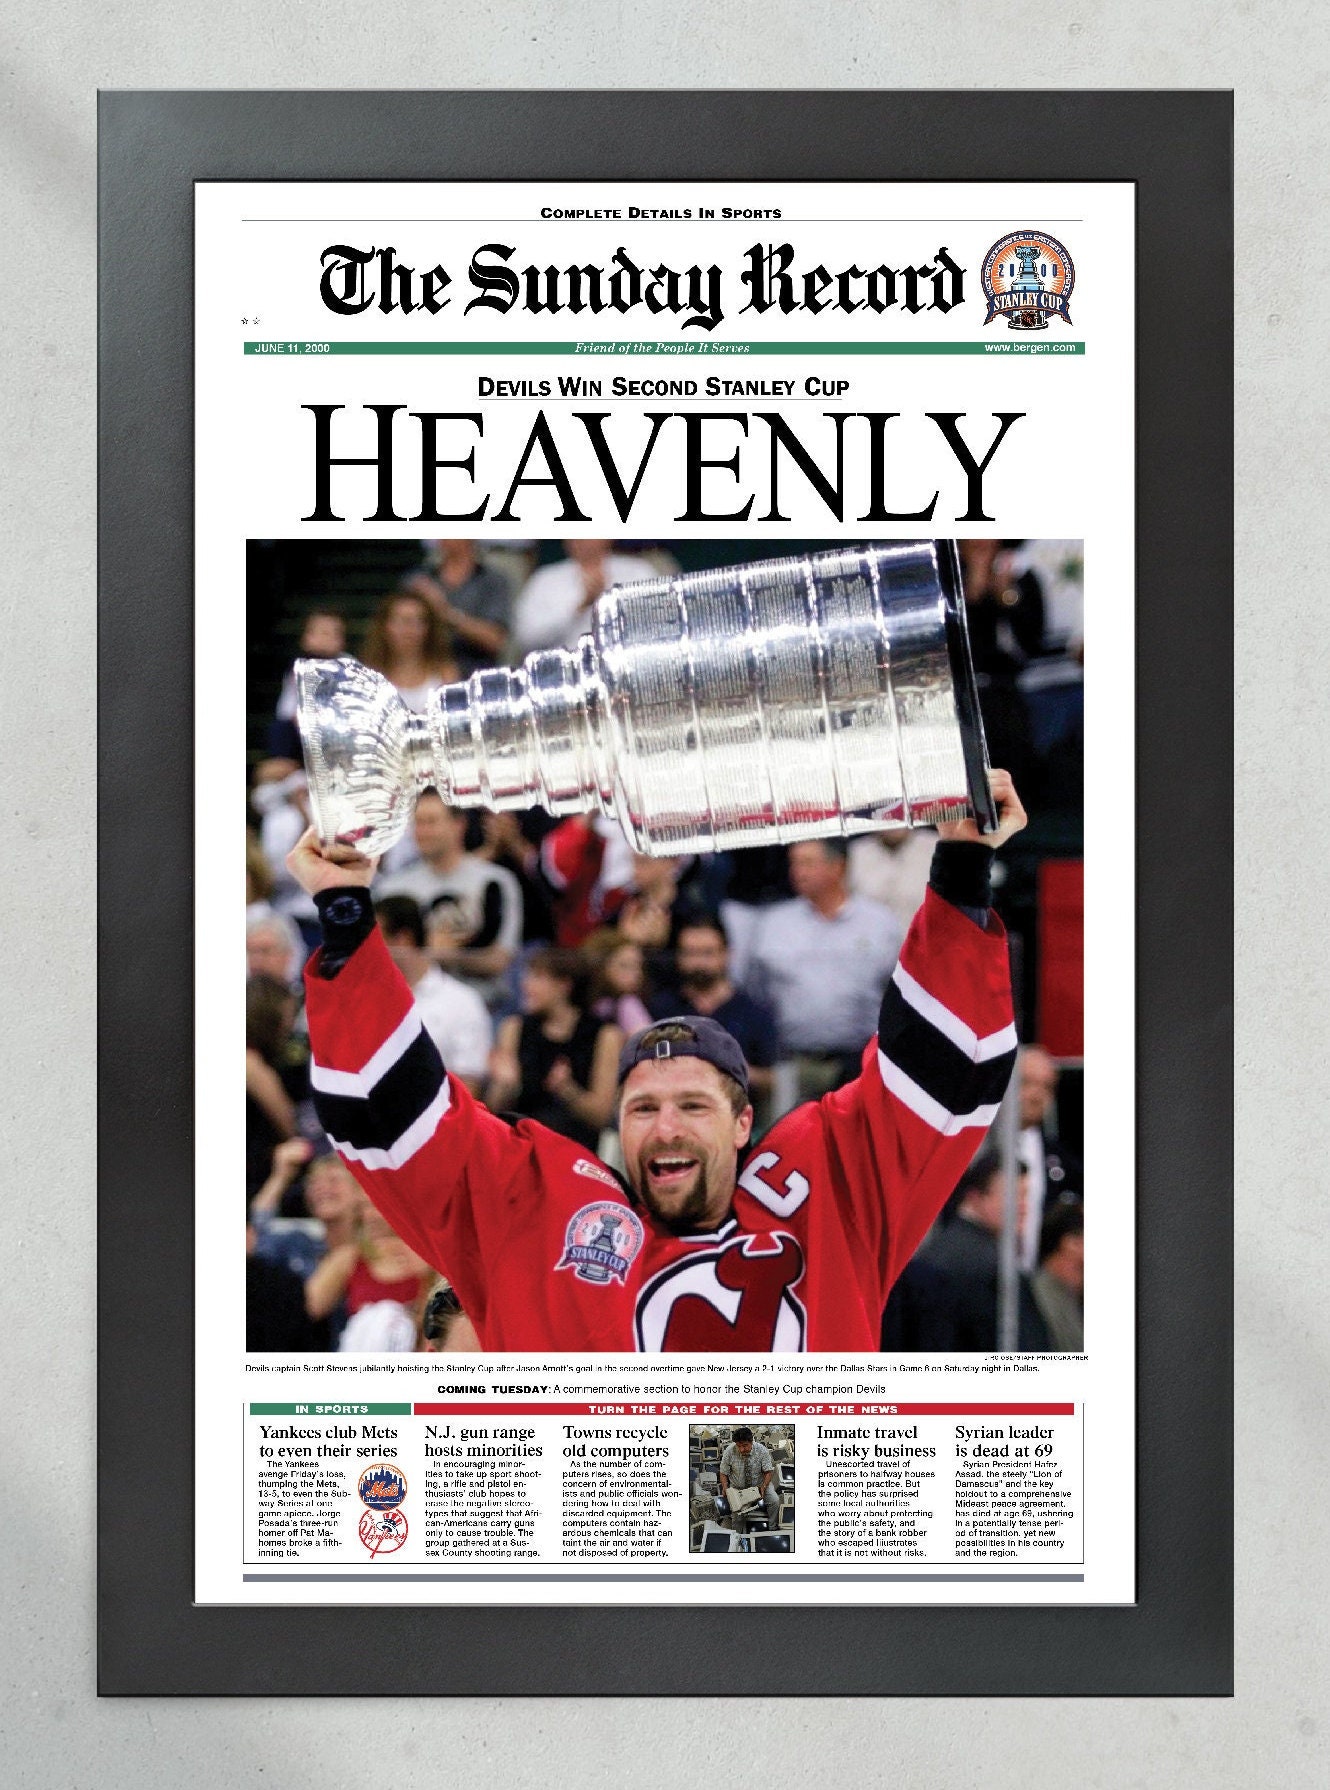 NHL STANLEY CUP CHAMPIONS 2000 - New Jersey Devils 